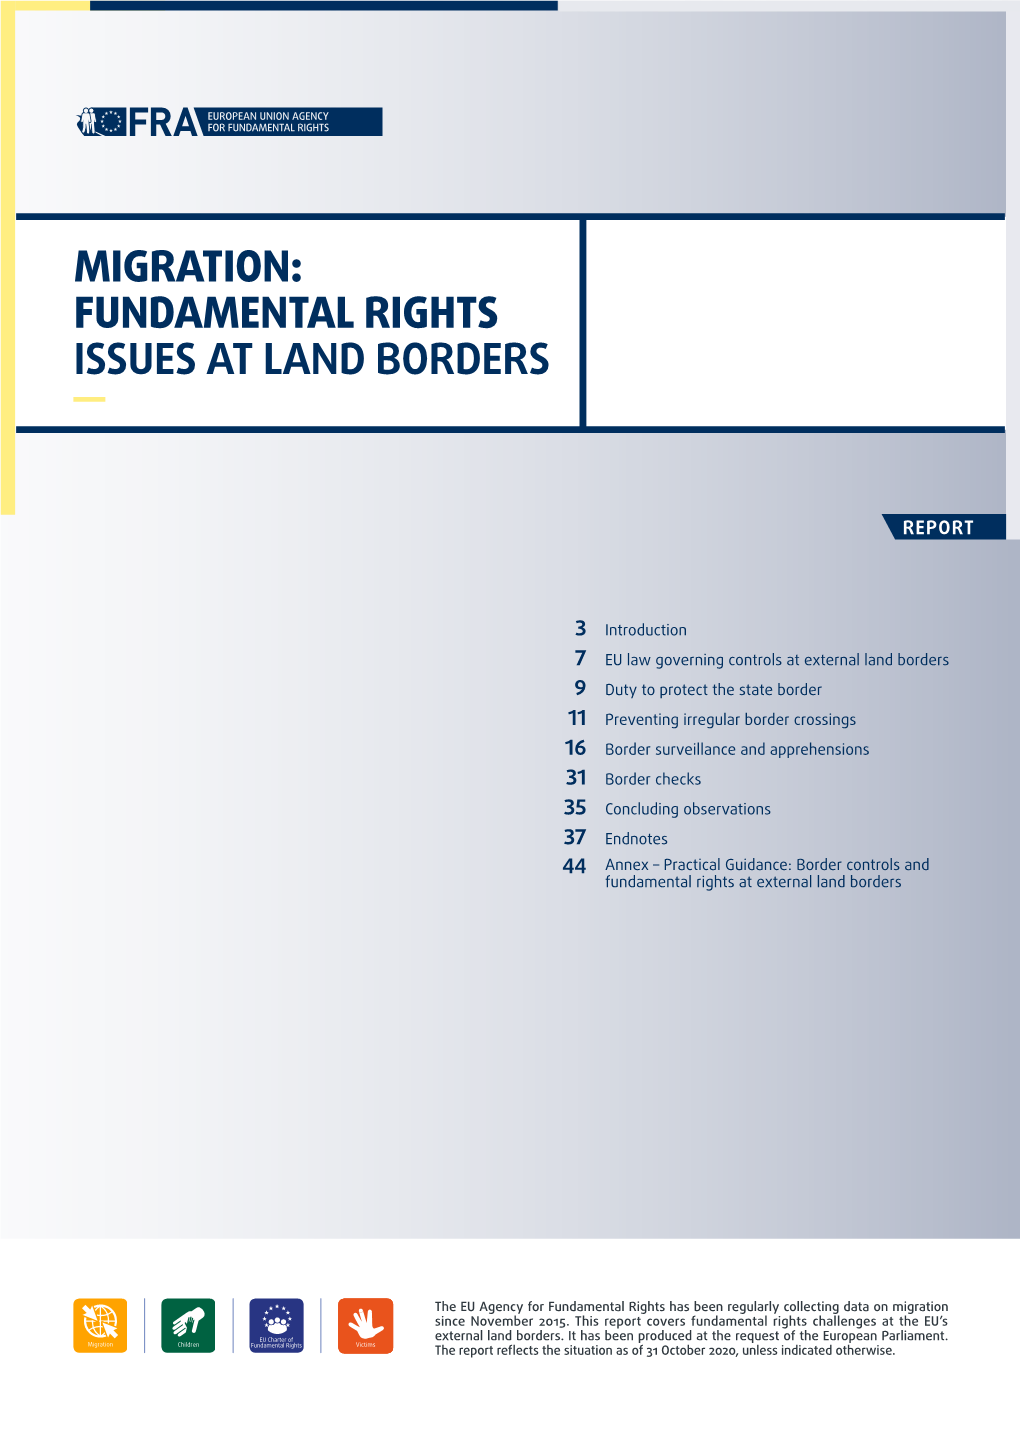 Migration: Fundamental Rights Issues at Land Borders ―